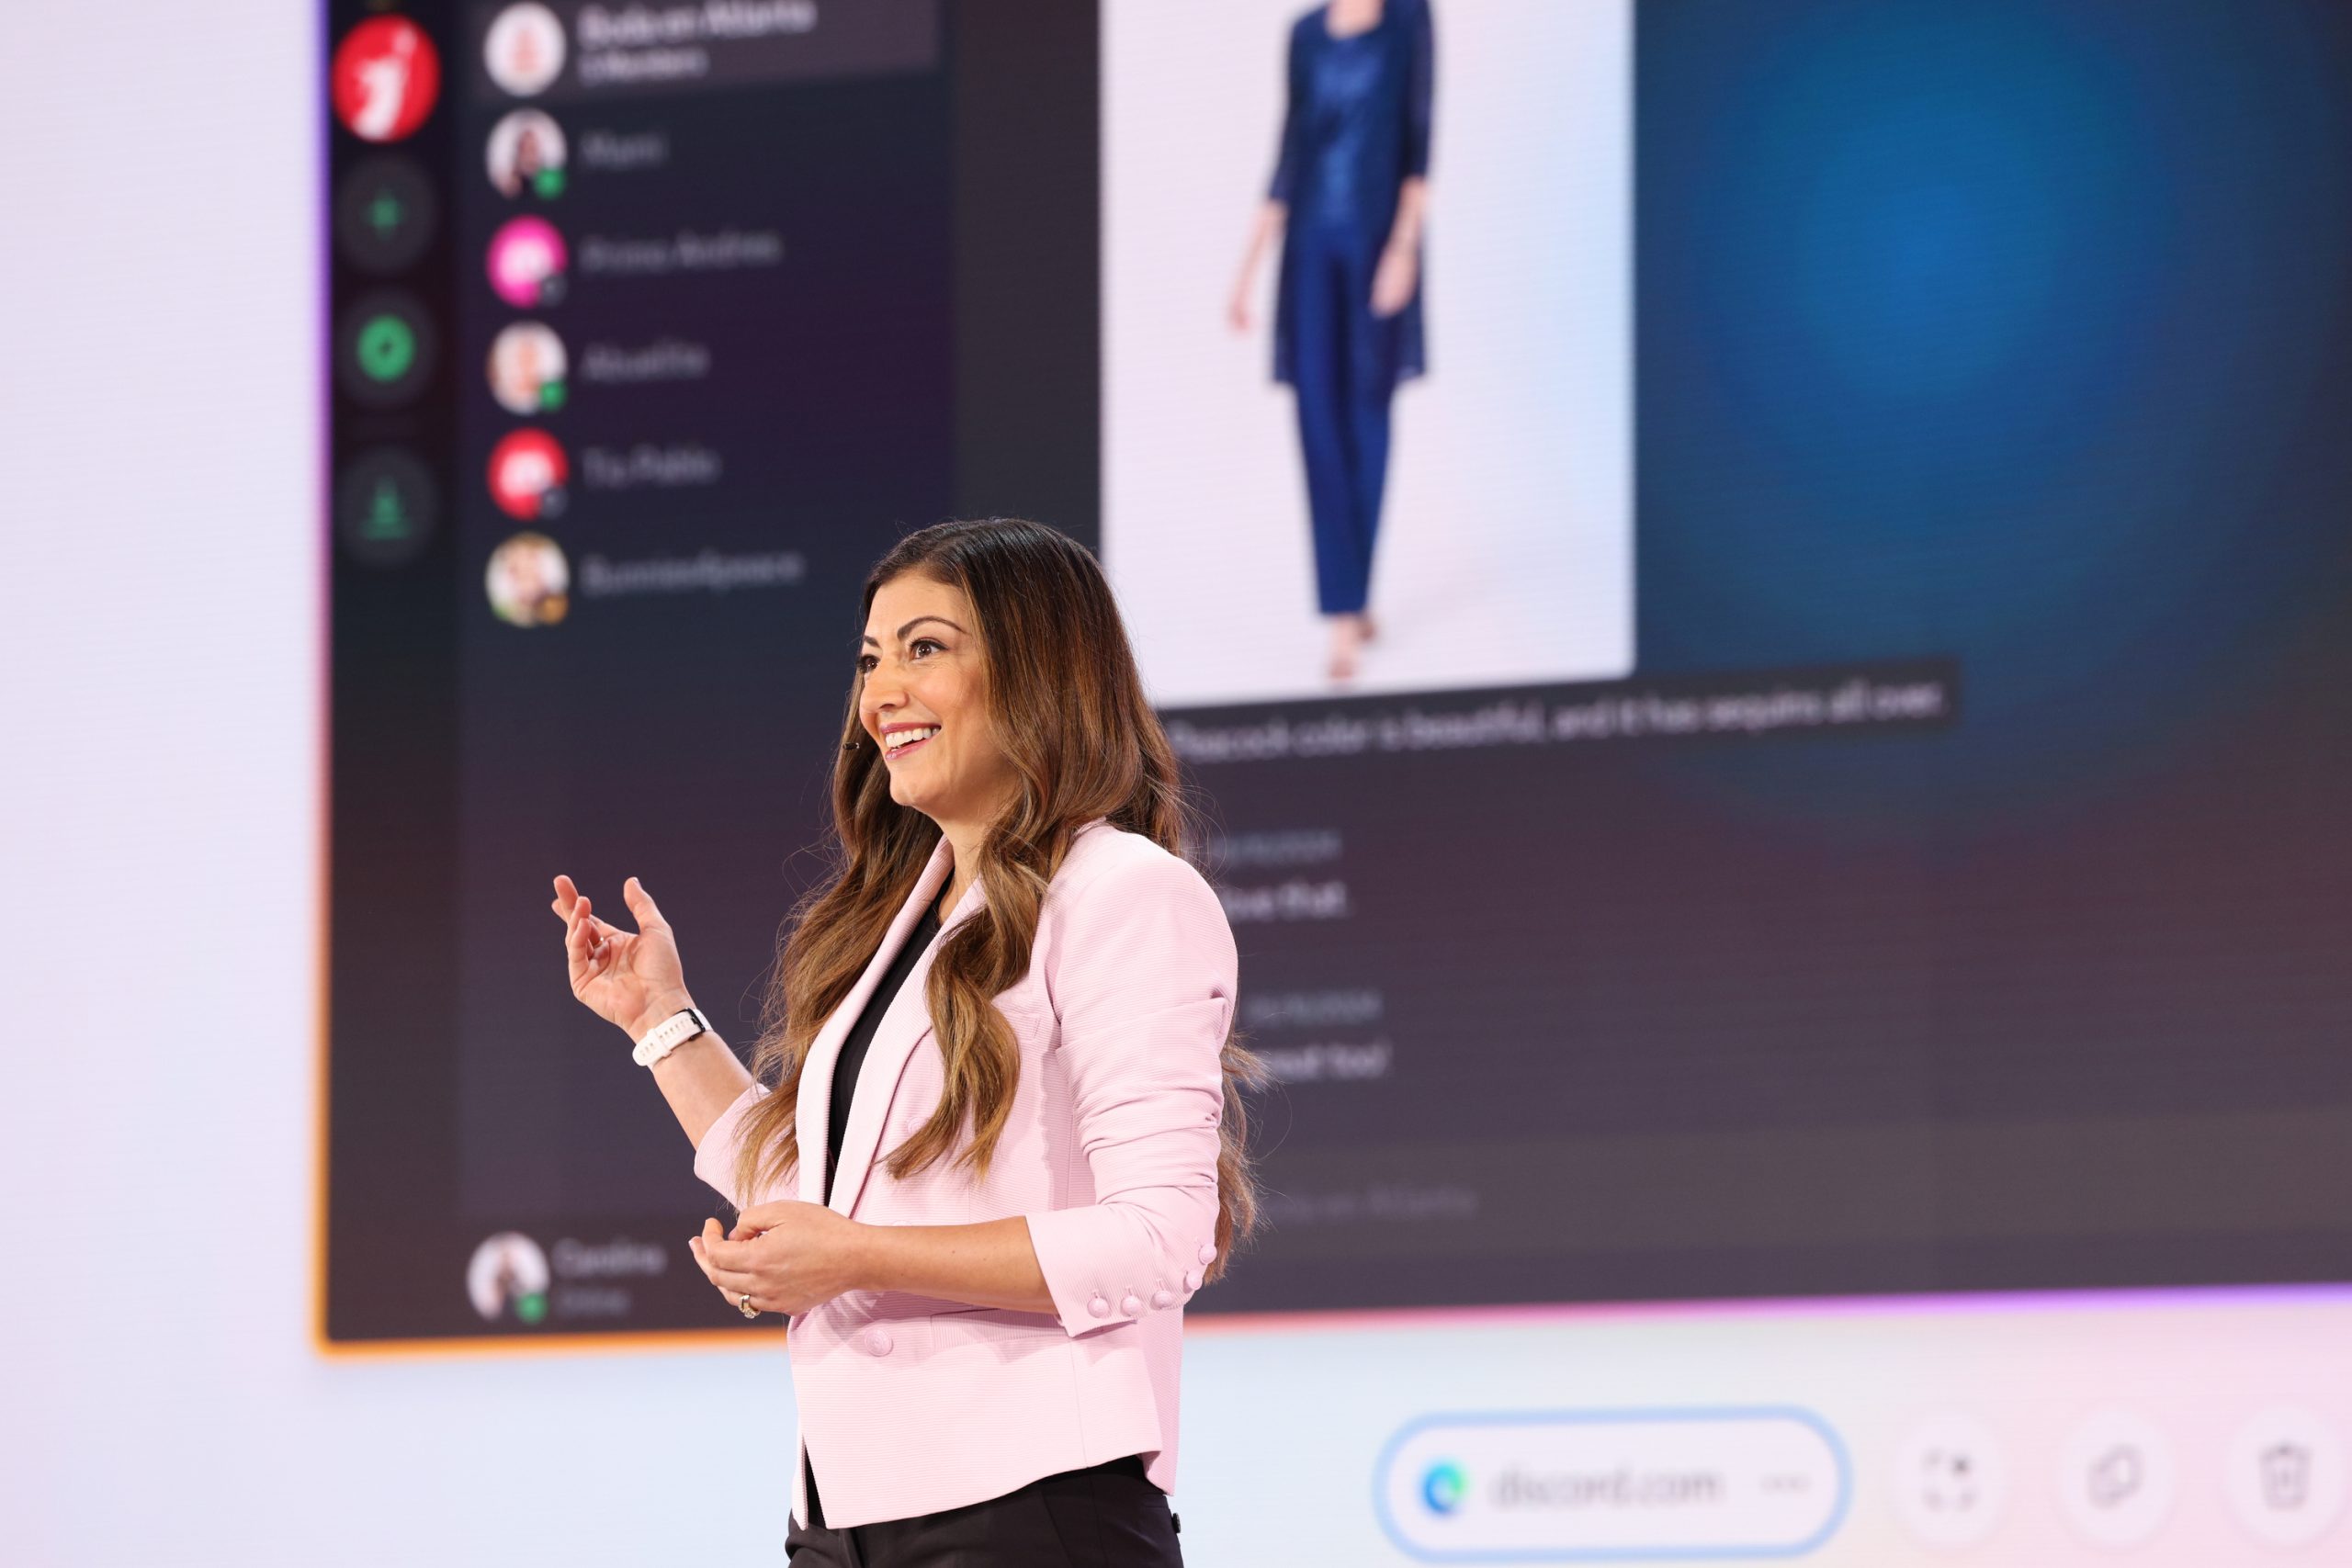 A woman standing on stage in front of an audience, with a device user interface projected on the screen behind her